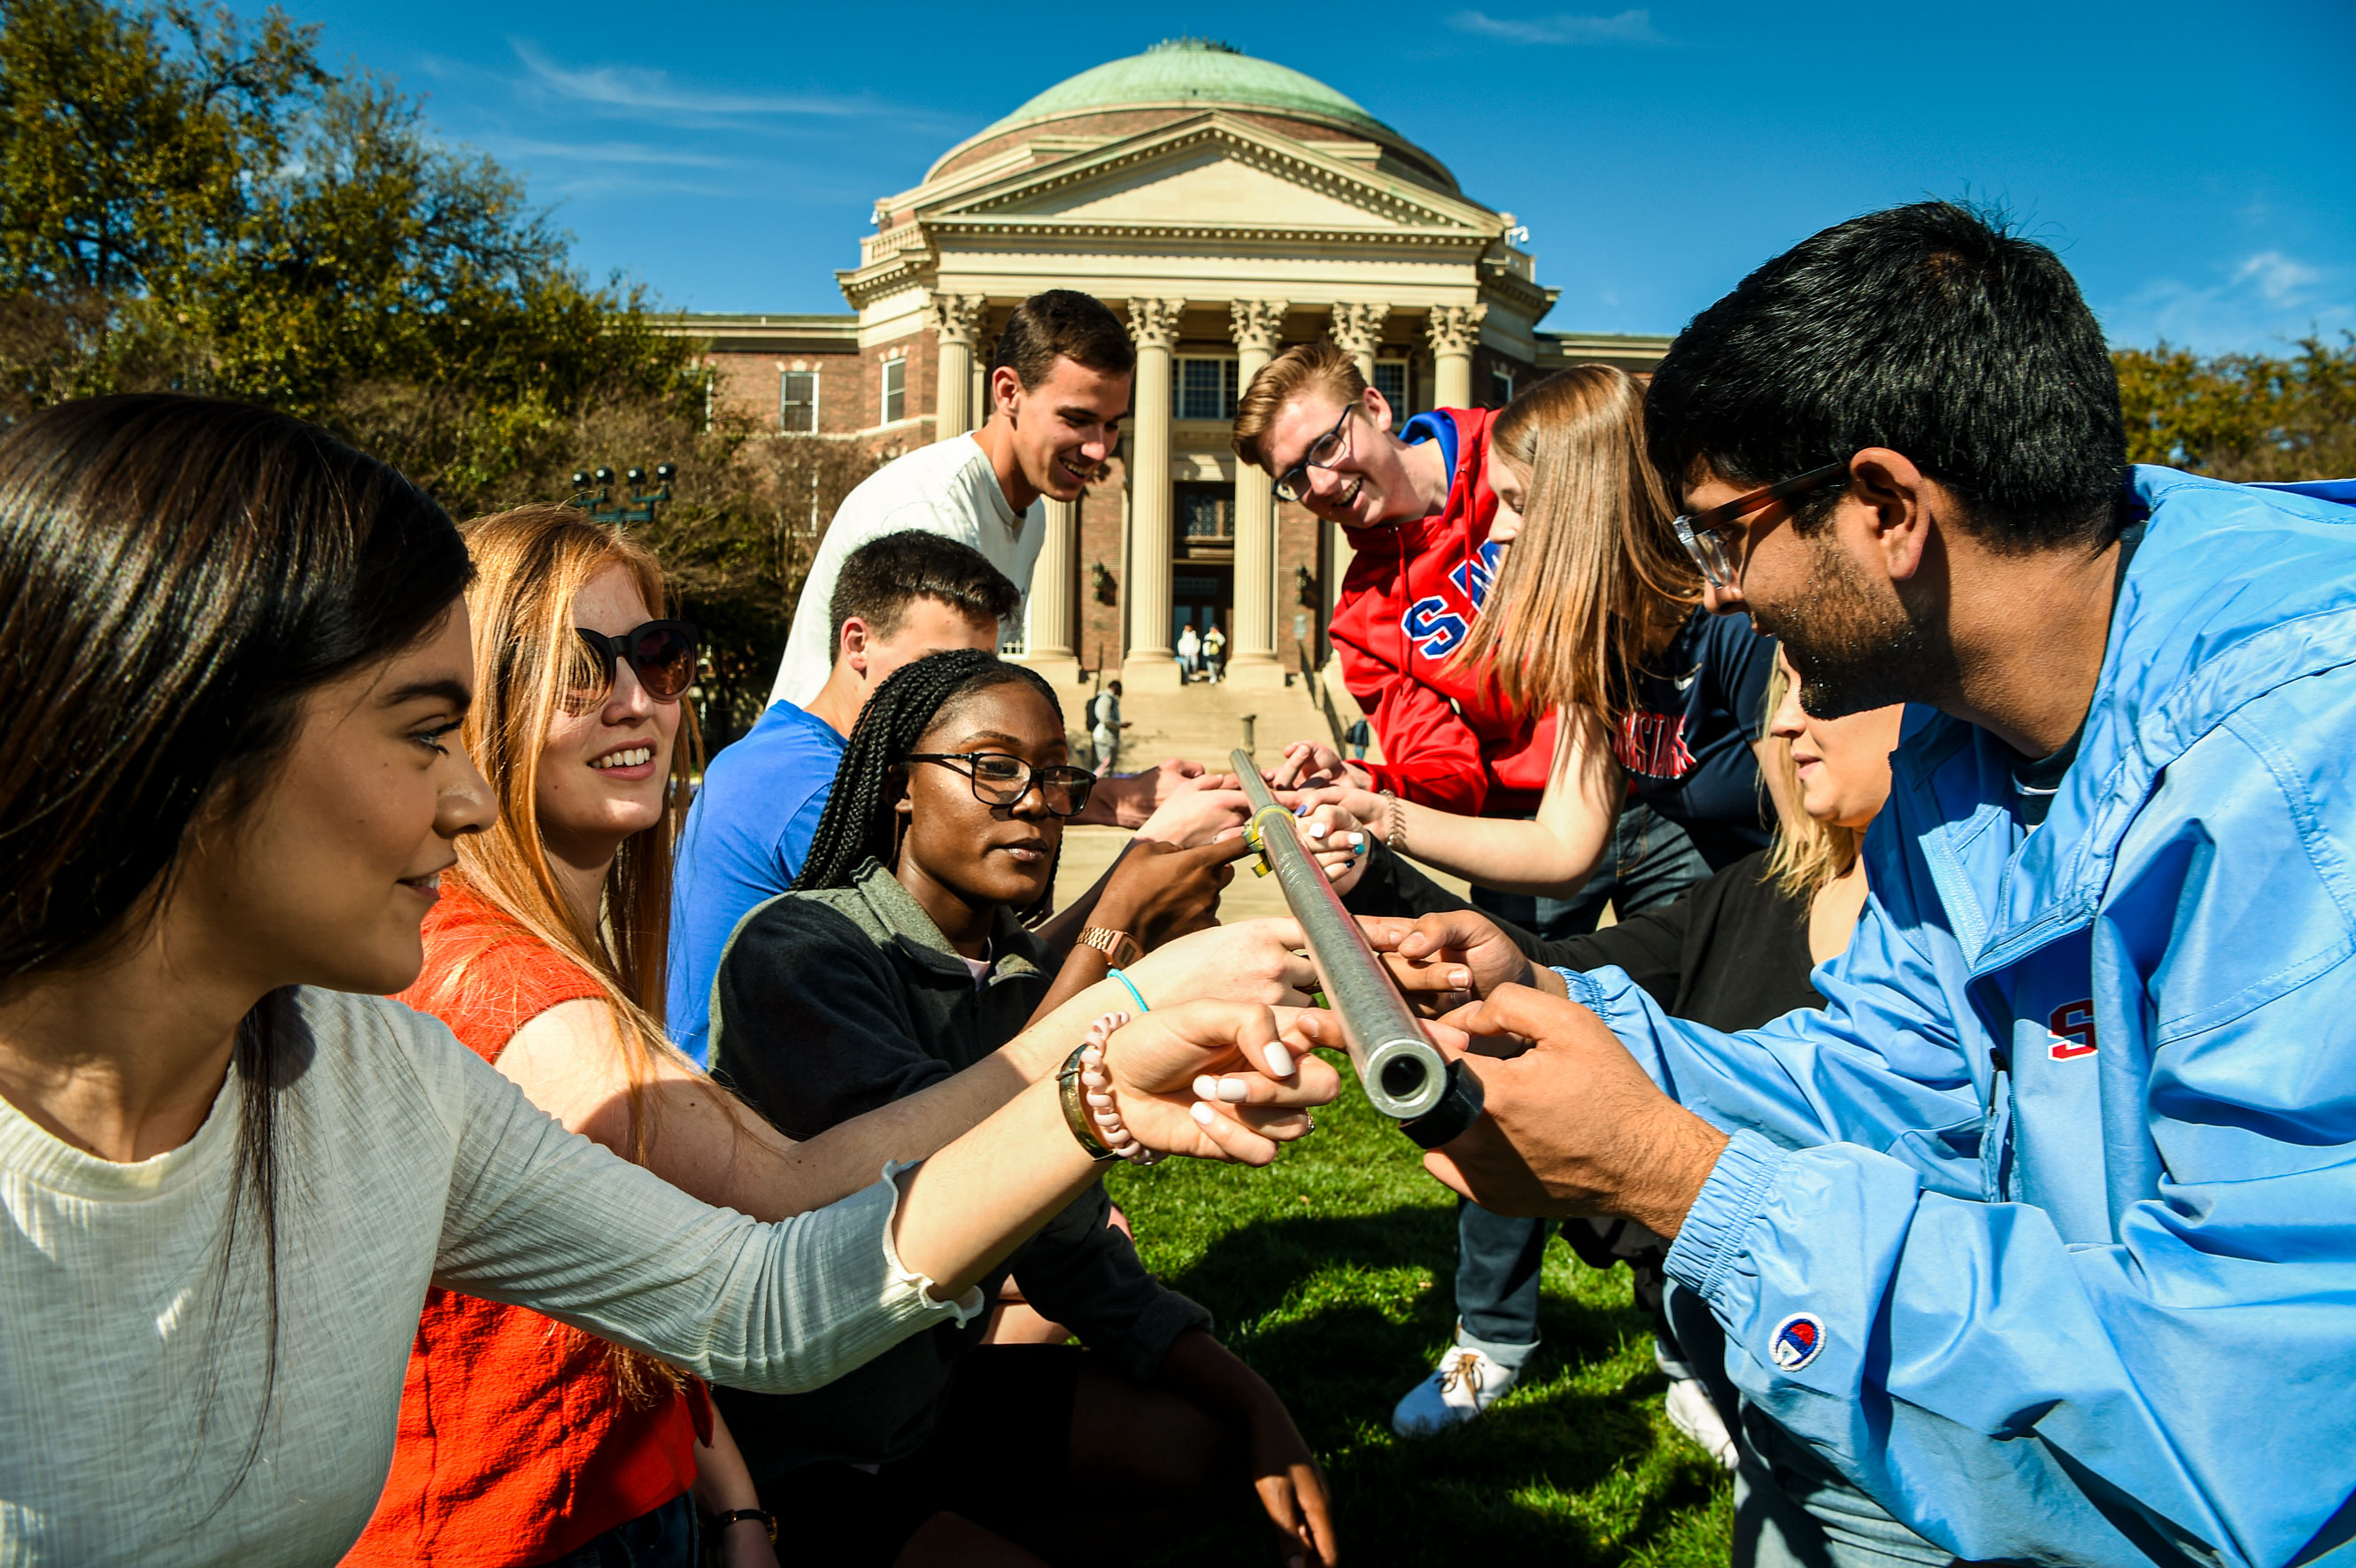 Students working together during a team building activity on Dallas Hall lawn.